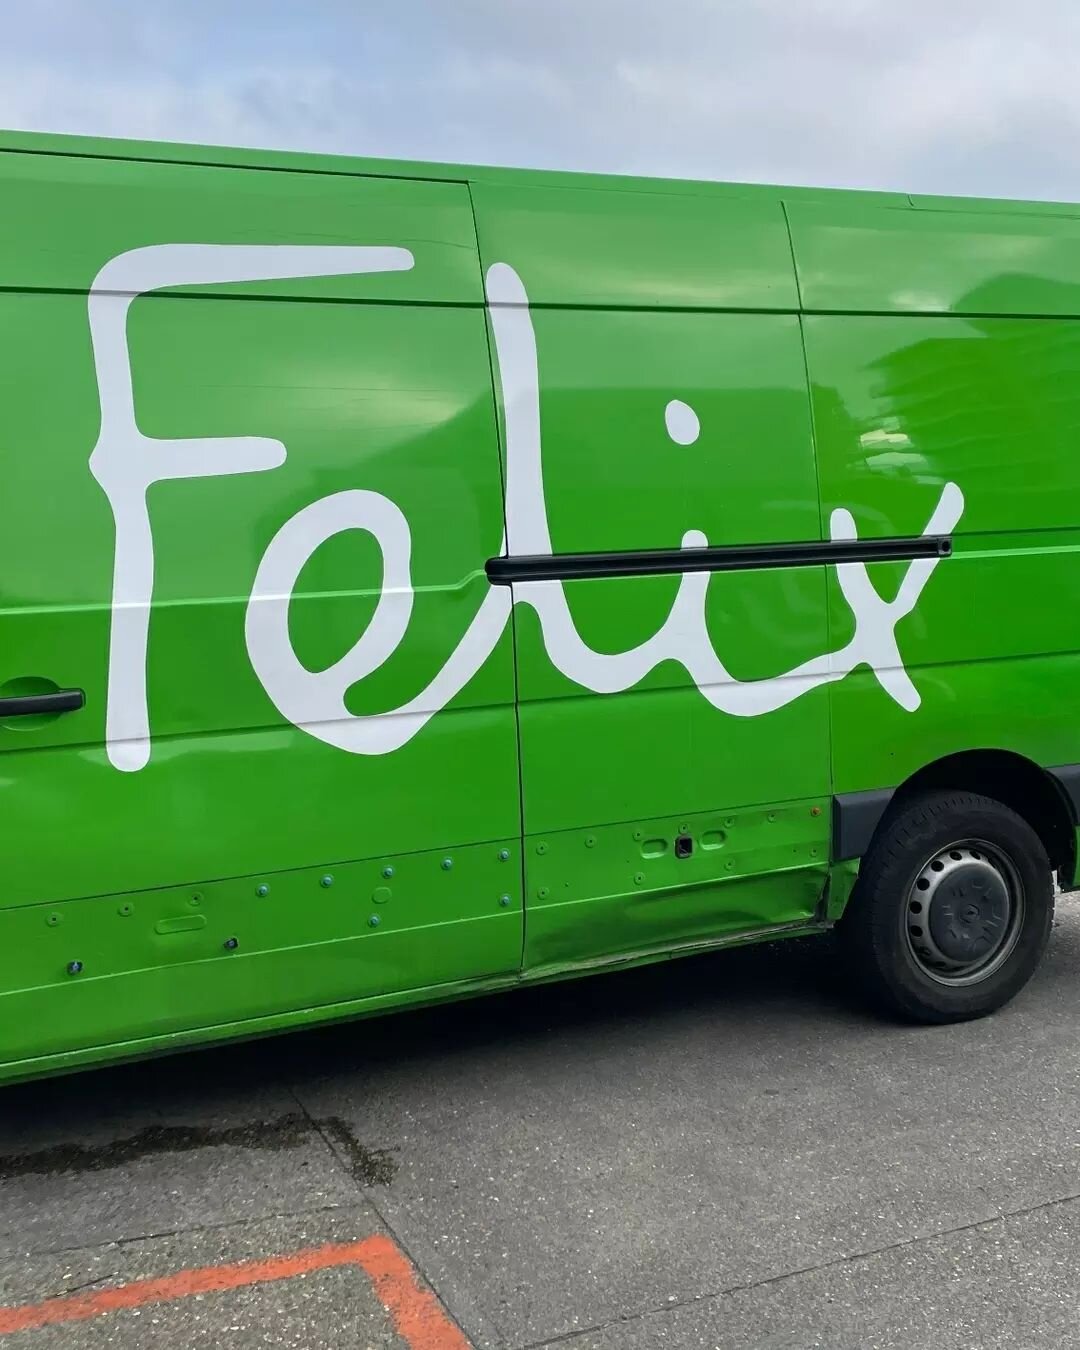 The AGC team used some of their 24 charity hours and spent the day volunteering for The Felix Project&nbsp;💚 

The Felix Project is a charity that aims to reduce food waste and hunger by collecting surplus food from food suppliers and redistributing